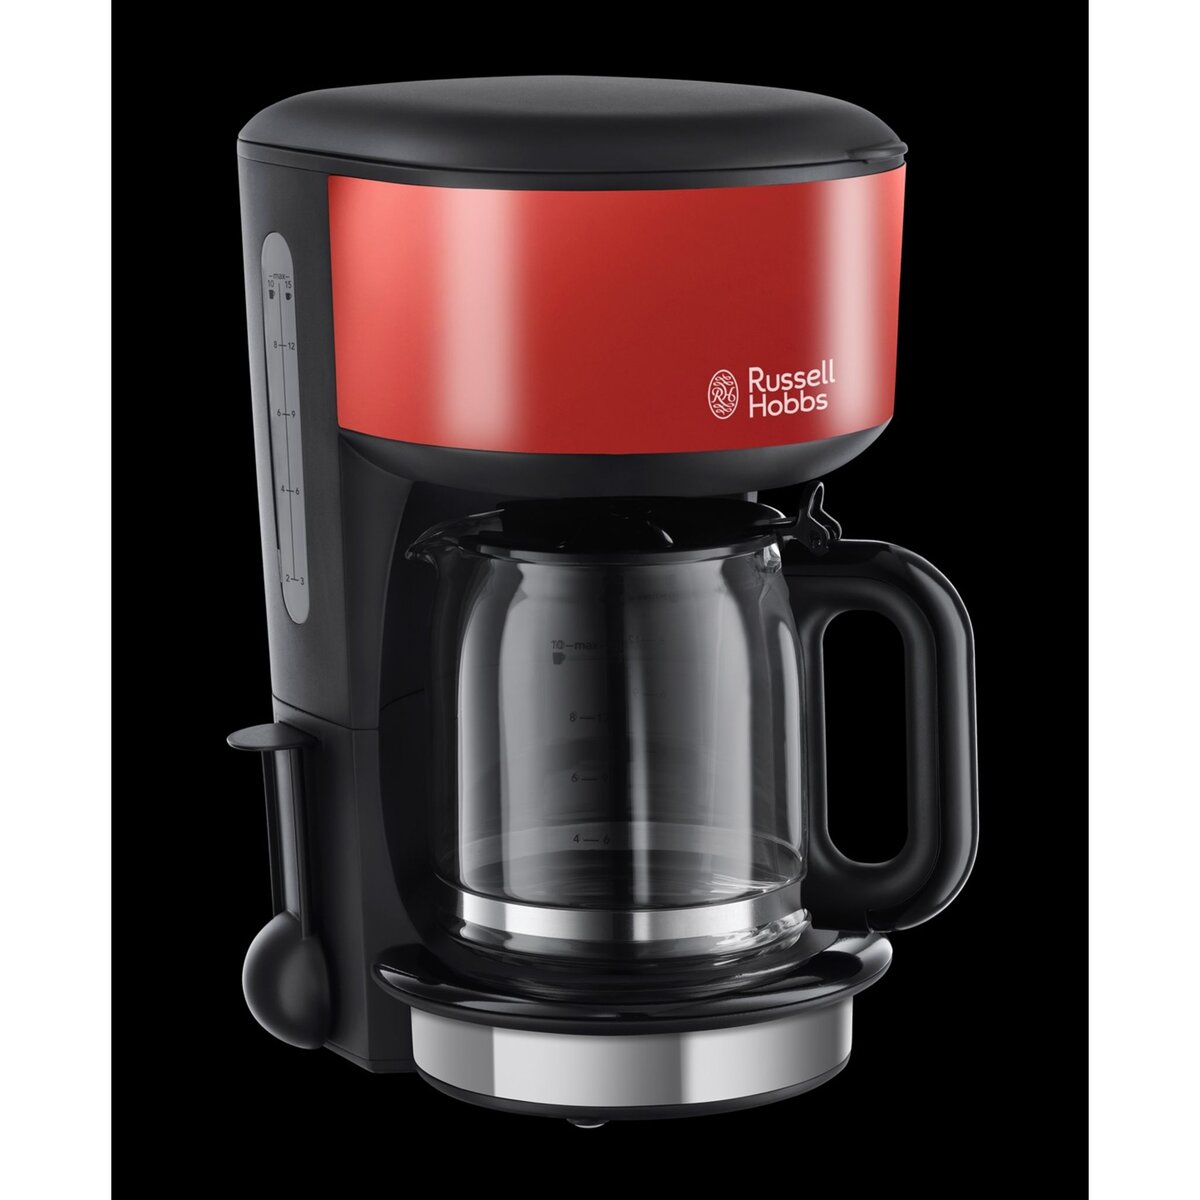 RUSSELLHOB Cafetiere 20131-56 Colours Rouge